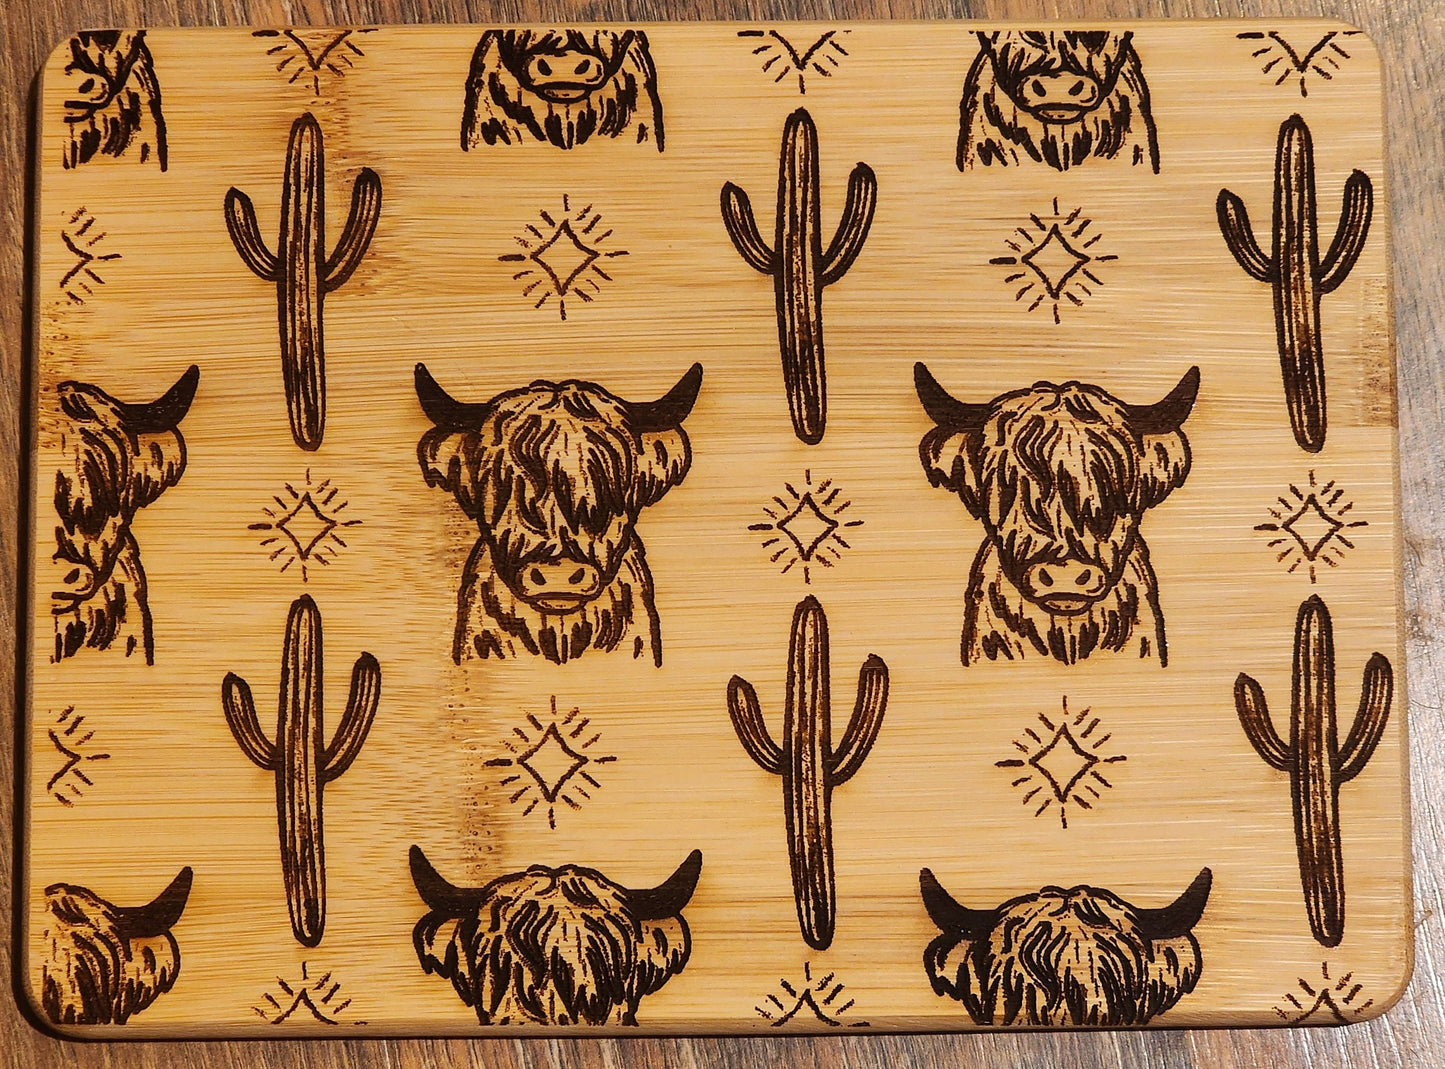 Highland Cow and Cactus, western, country etched Bamboo Wood Cutting Board  - 8.75 x 6.875 inches